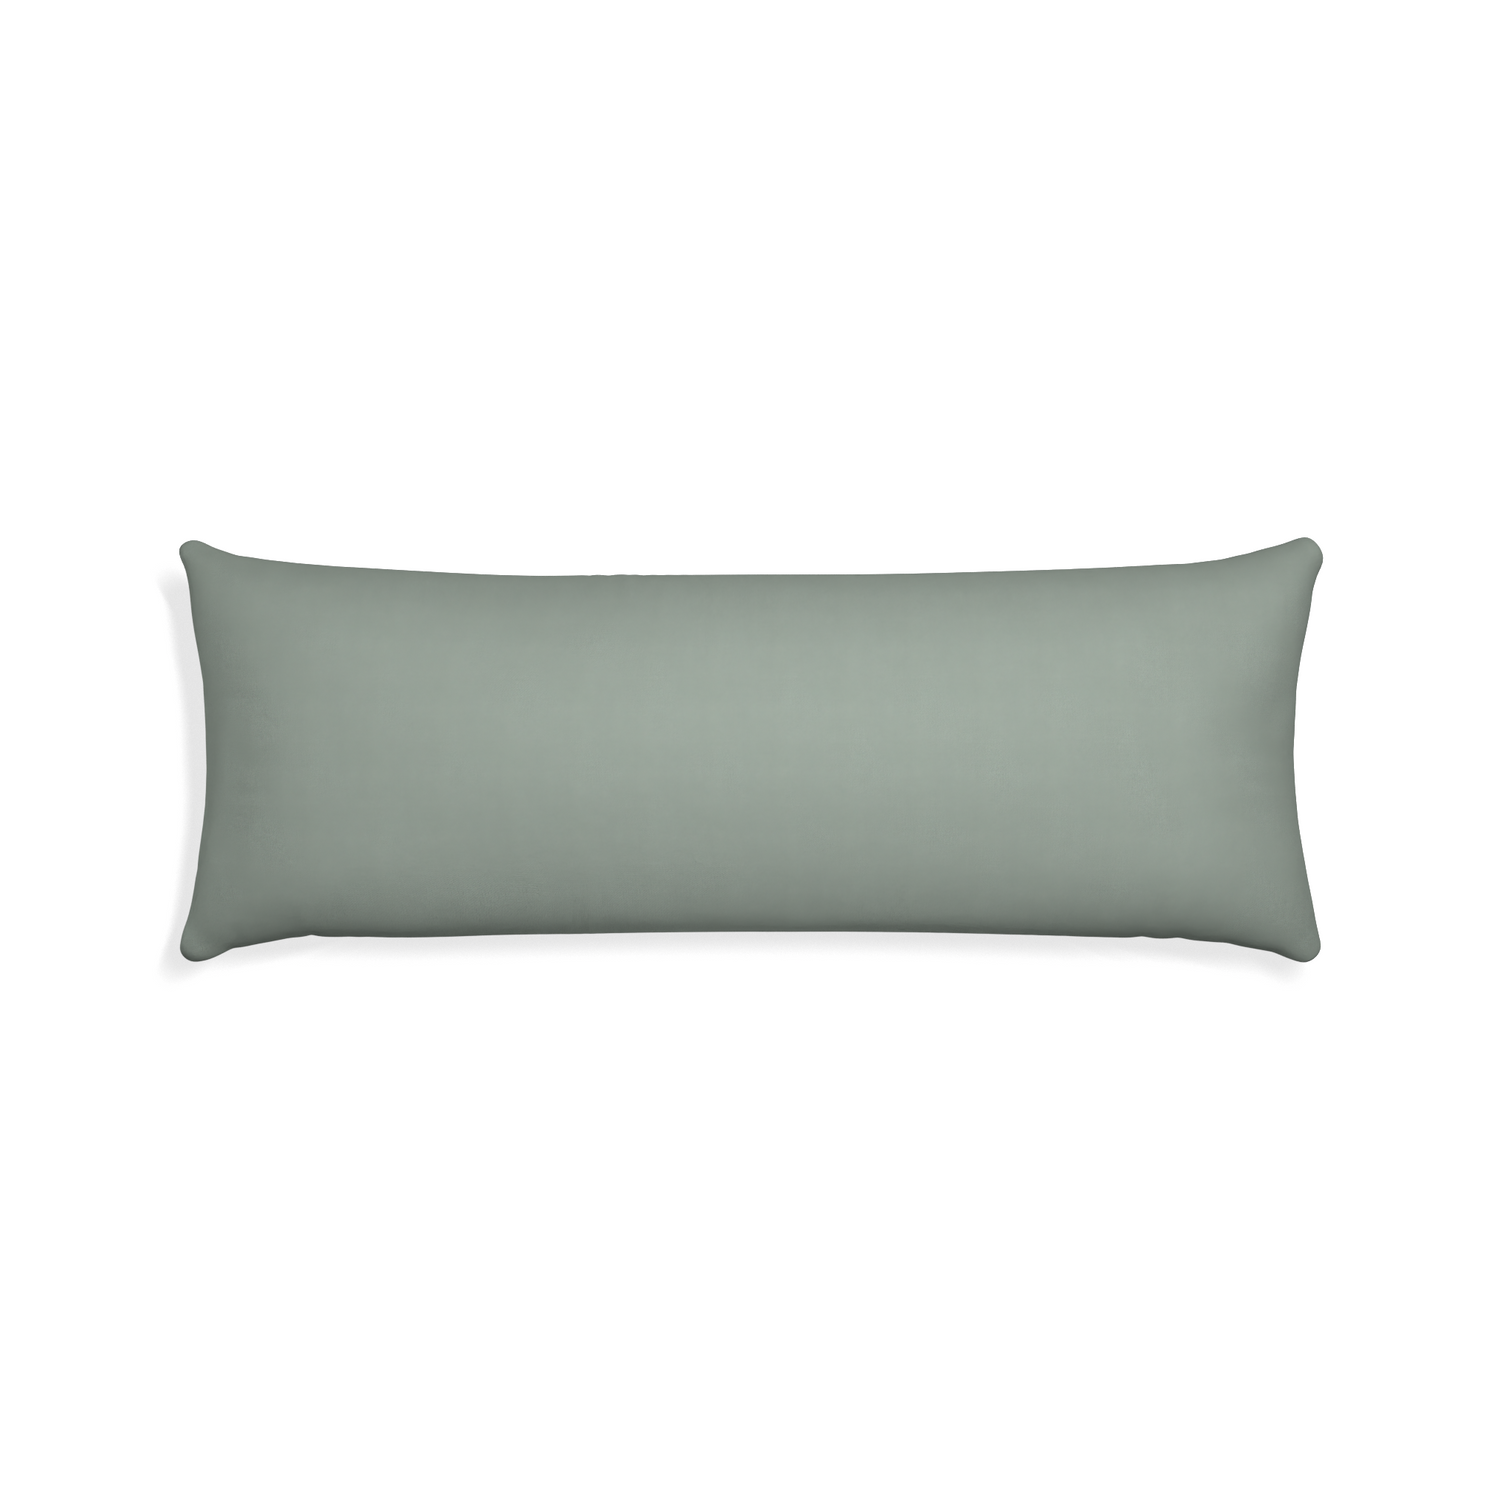 Xl-lumbar sage custom sage green cottonpillow with none on white background